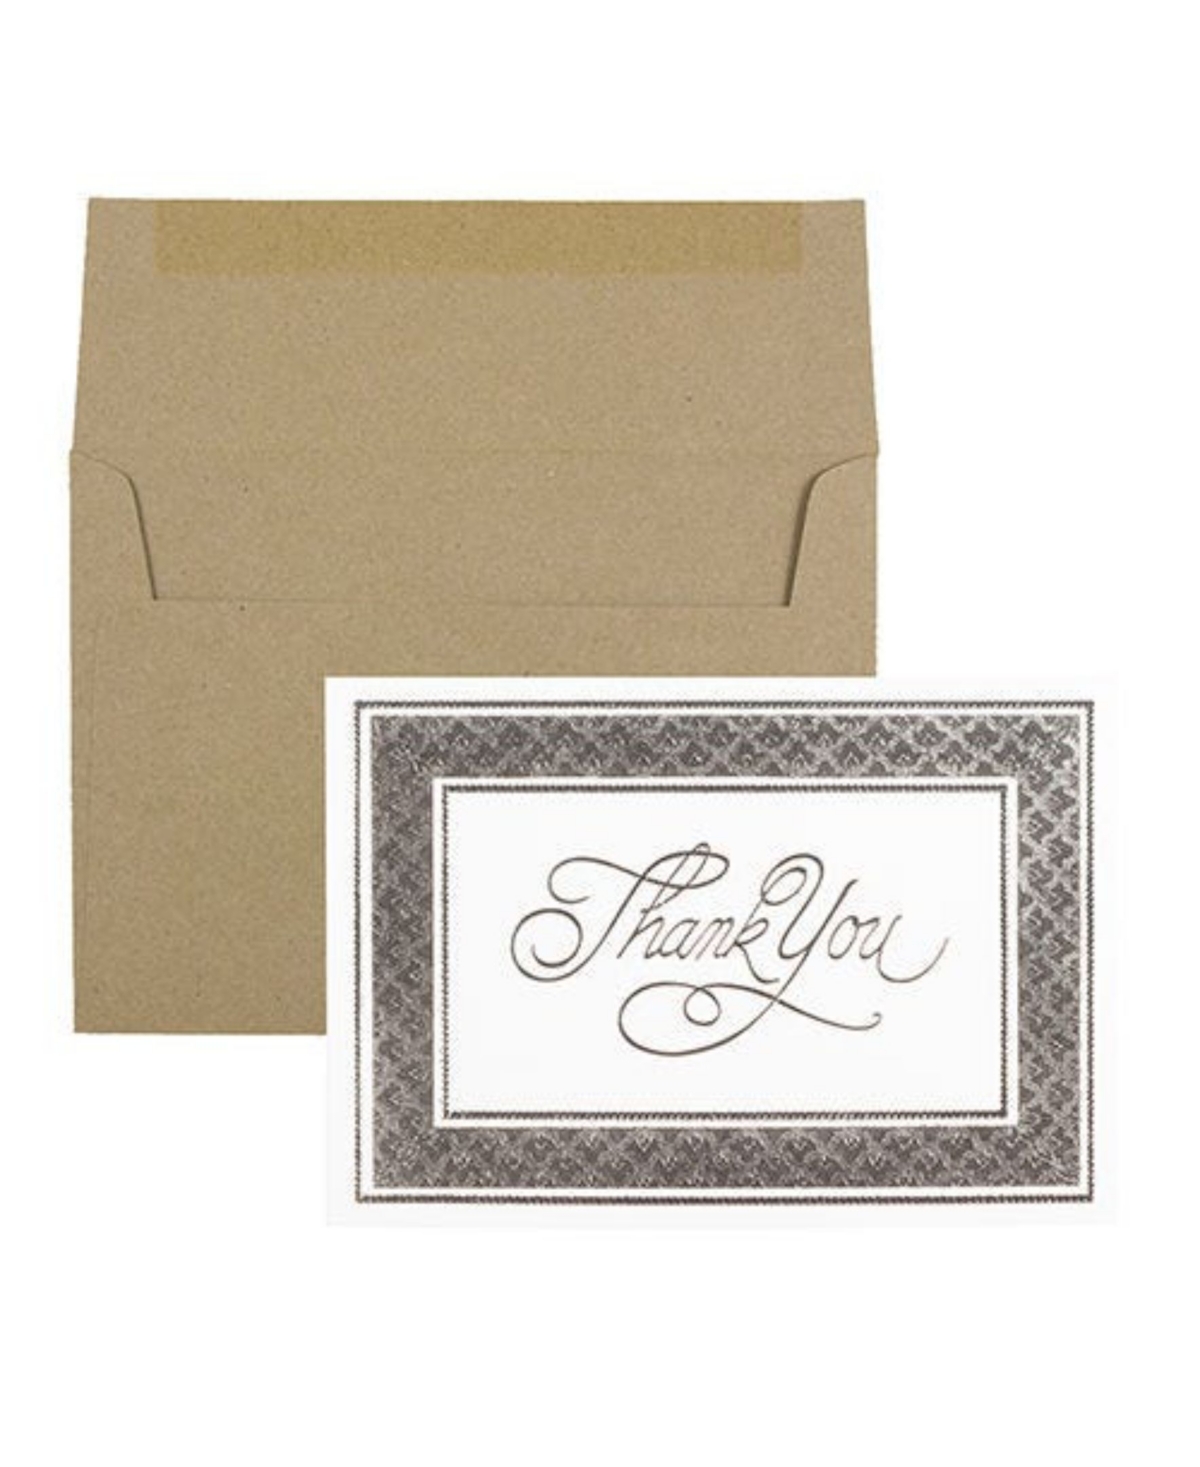 Thank You Card Sets - 25 Cards and Envelopes - Silver Border Cards with Brown Kraft Env